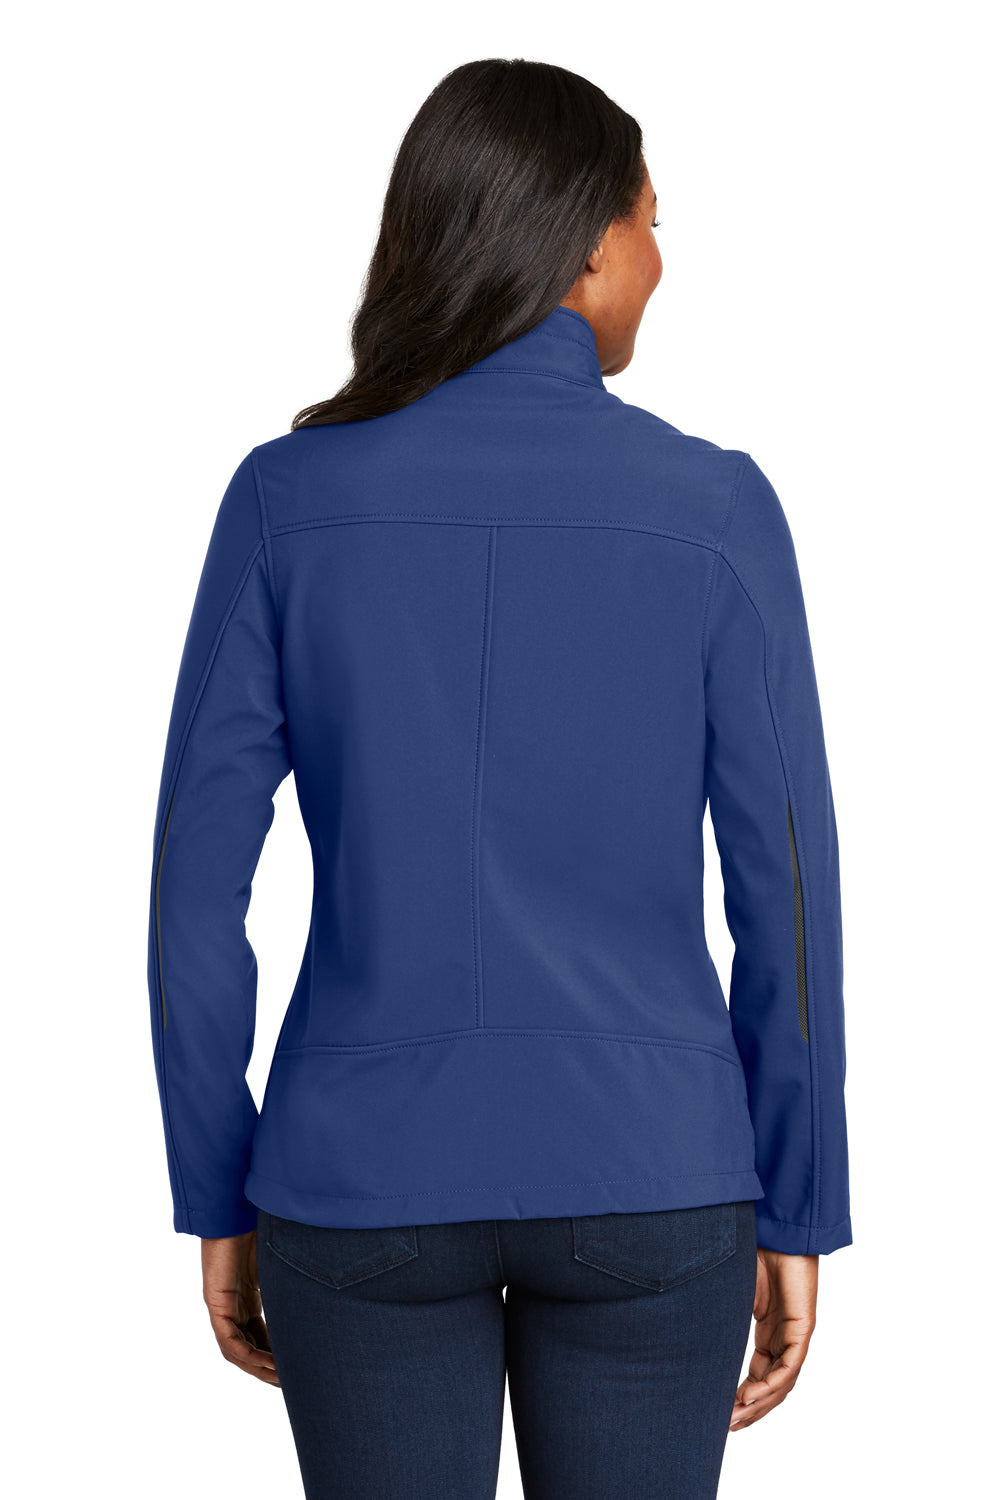 Port Authority L324 Womens Welded Wind & Water Resistant Full Zip Jacket Royal Blue Back